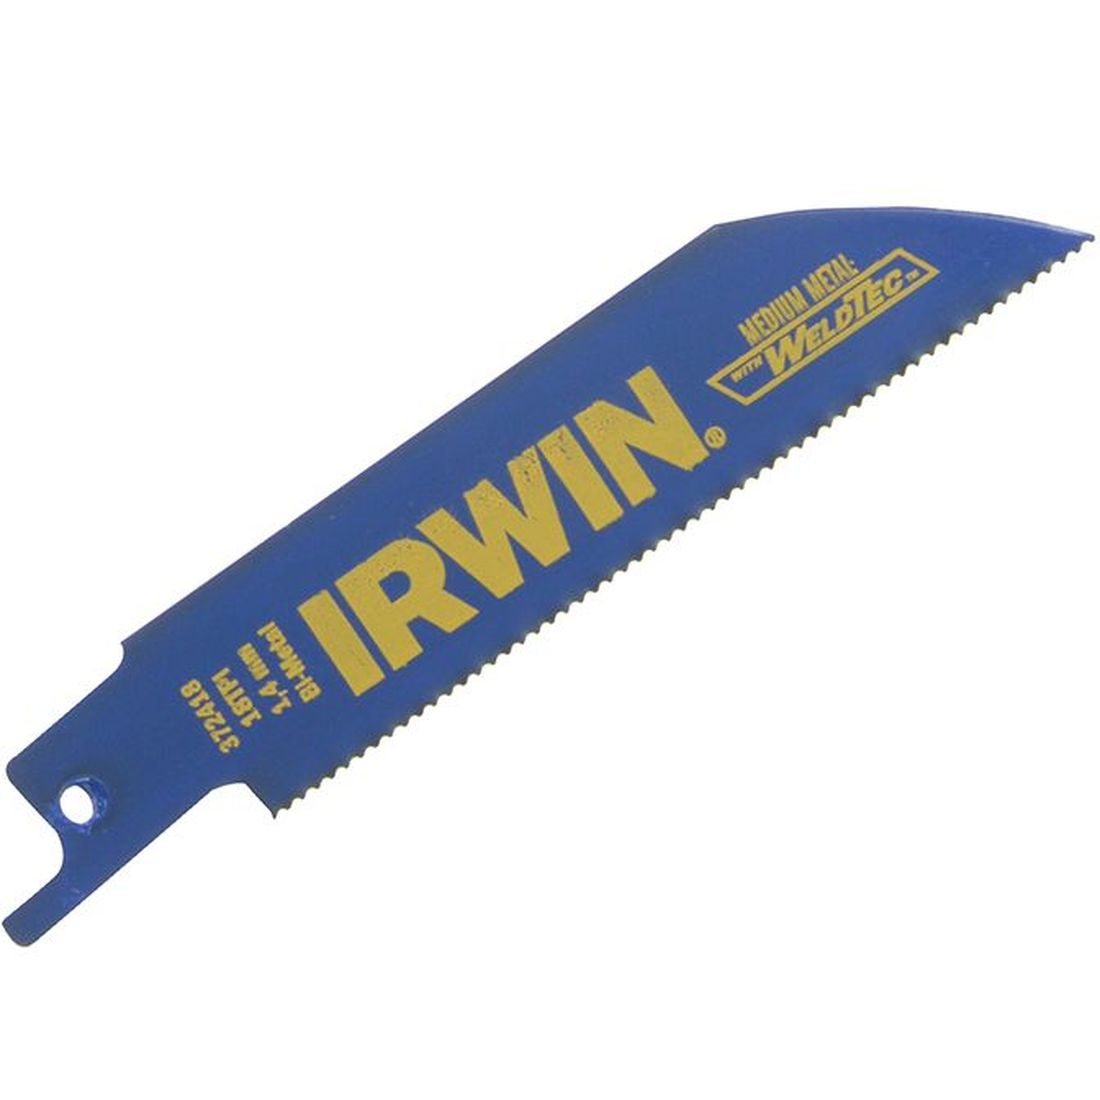 IRWIN 418R Sabre Saw Blade for Metal Cutting 100mm Pack of 5                          